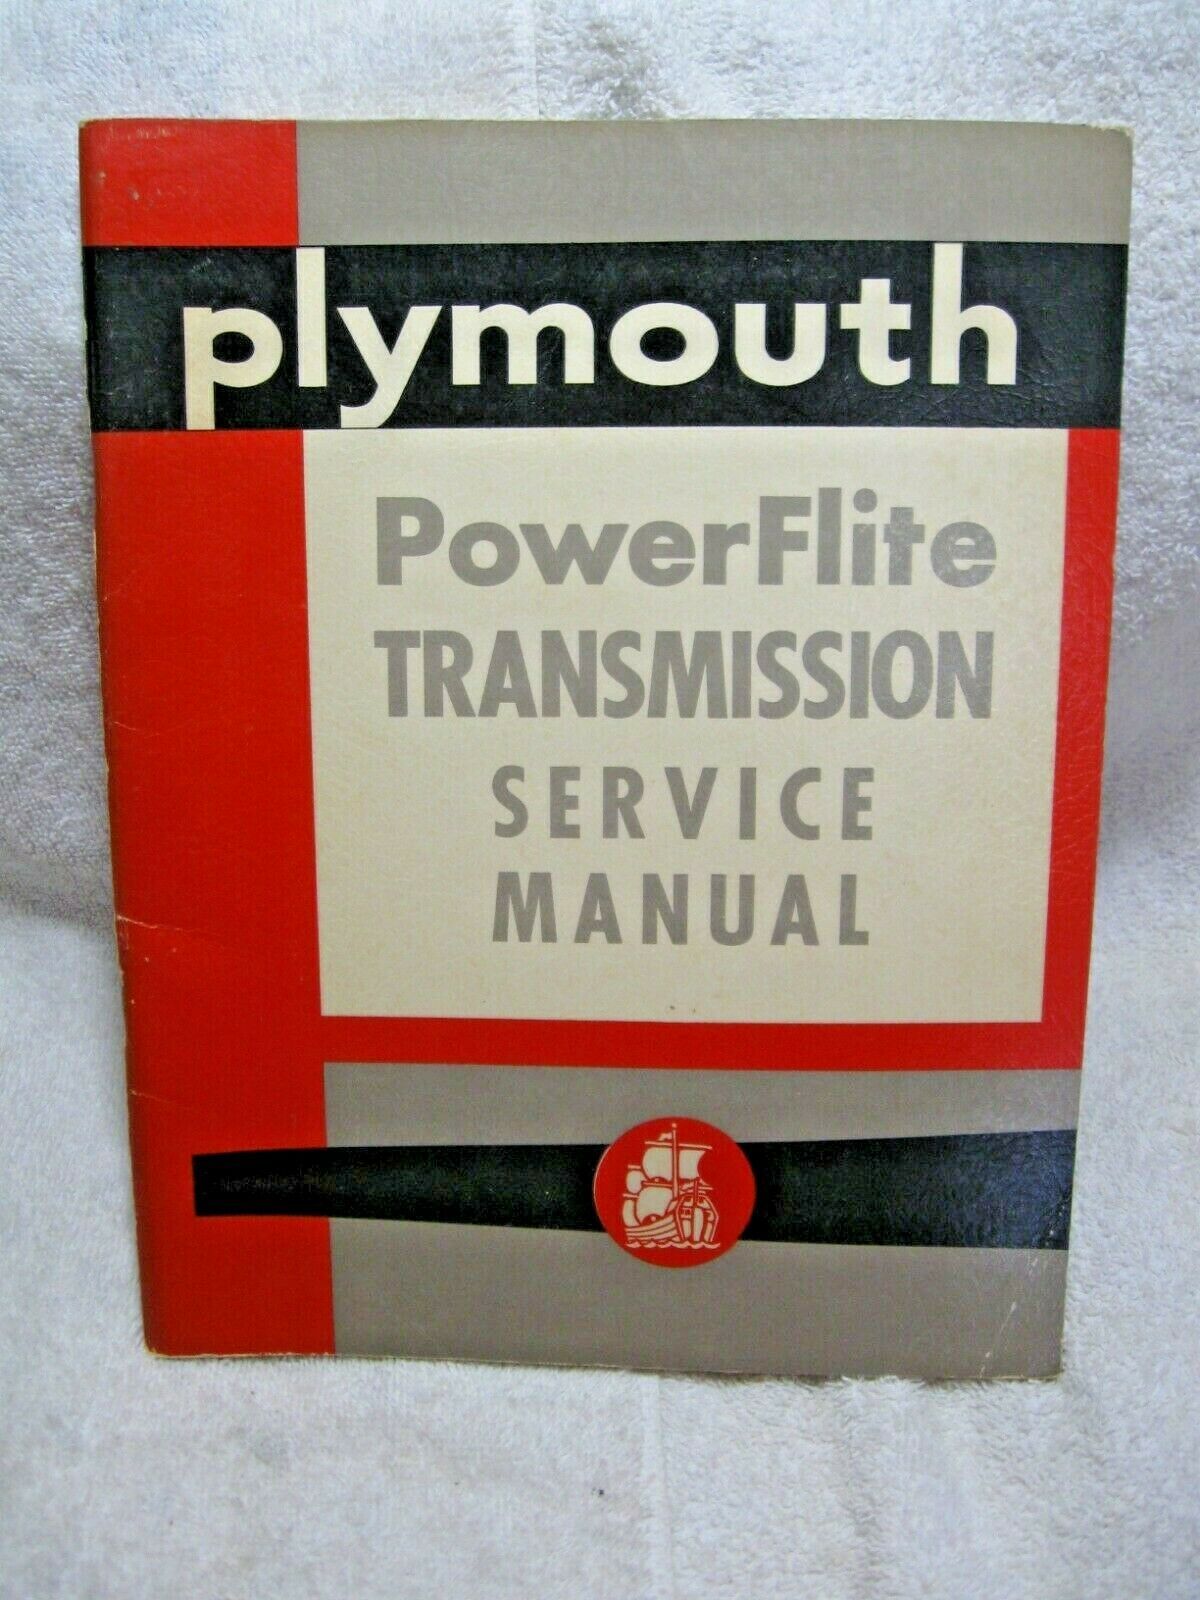 Vintage Collectible PLYMOUTH POWERFLITE TRANSMISSION SERVICE MANUAL-Chrysler!!! - $29.95